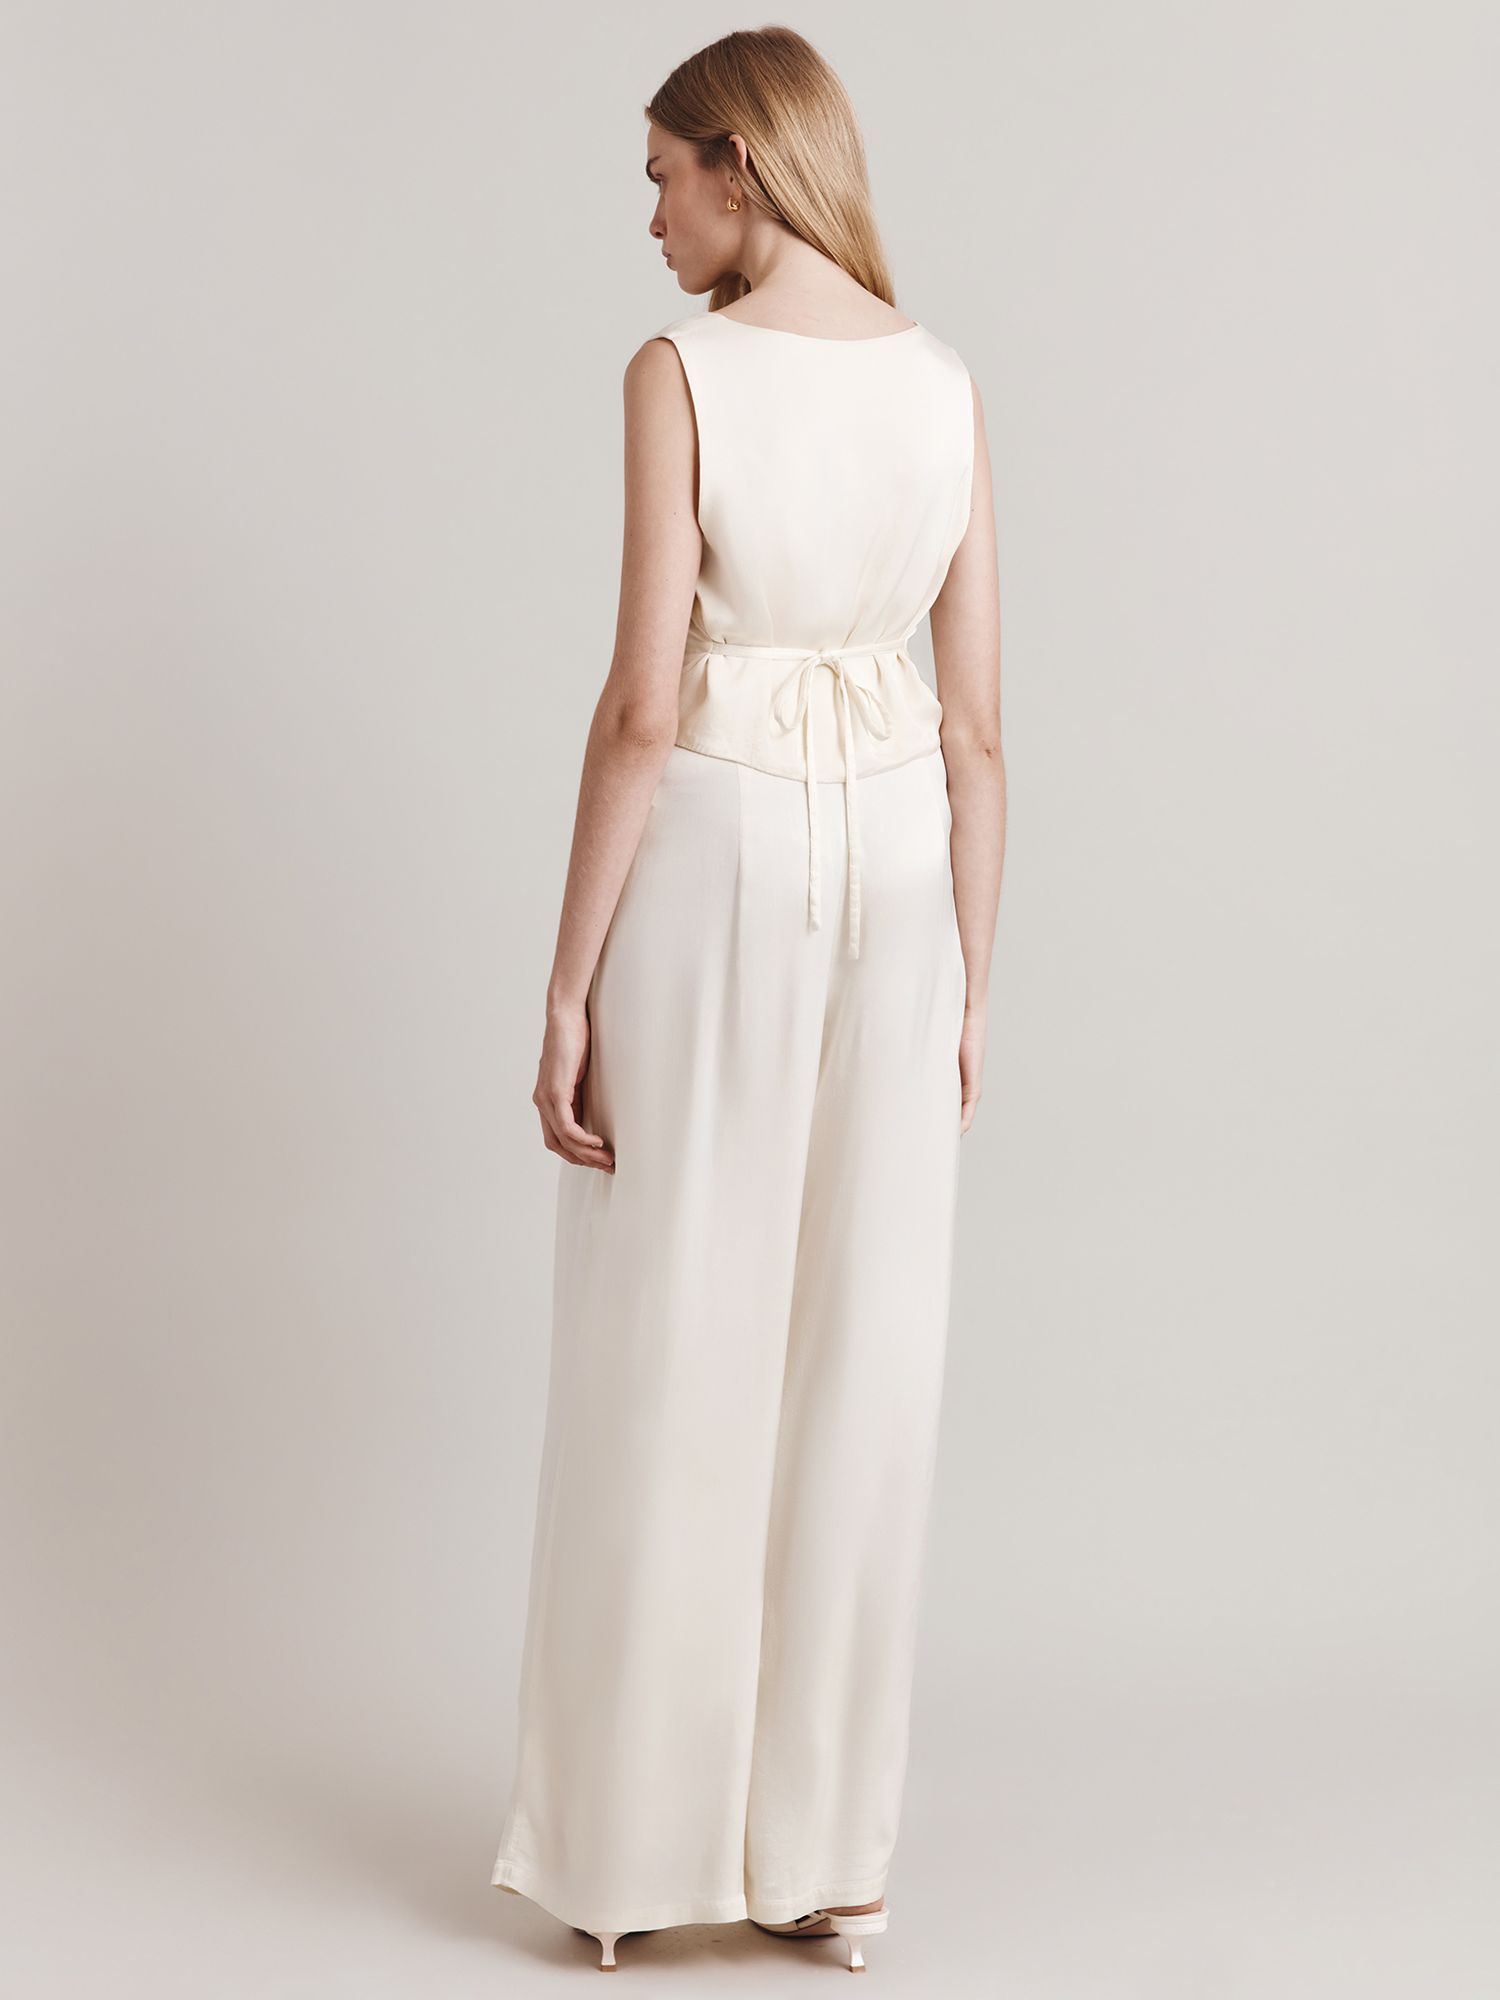 Ghost Eden Cropped Satin Waistcoat, Ivory, XS